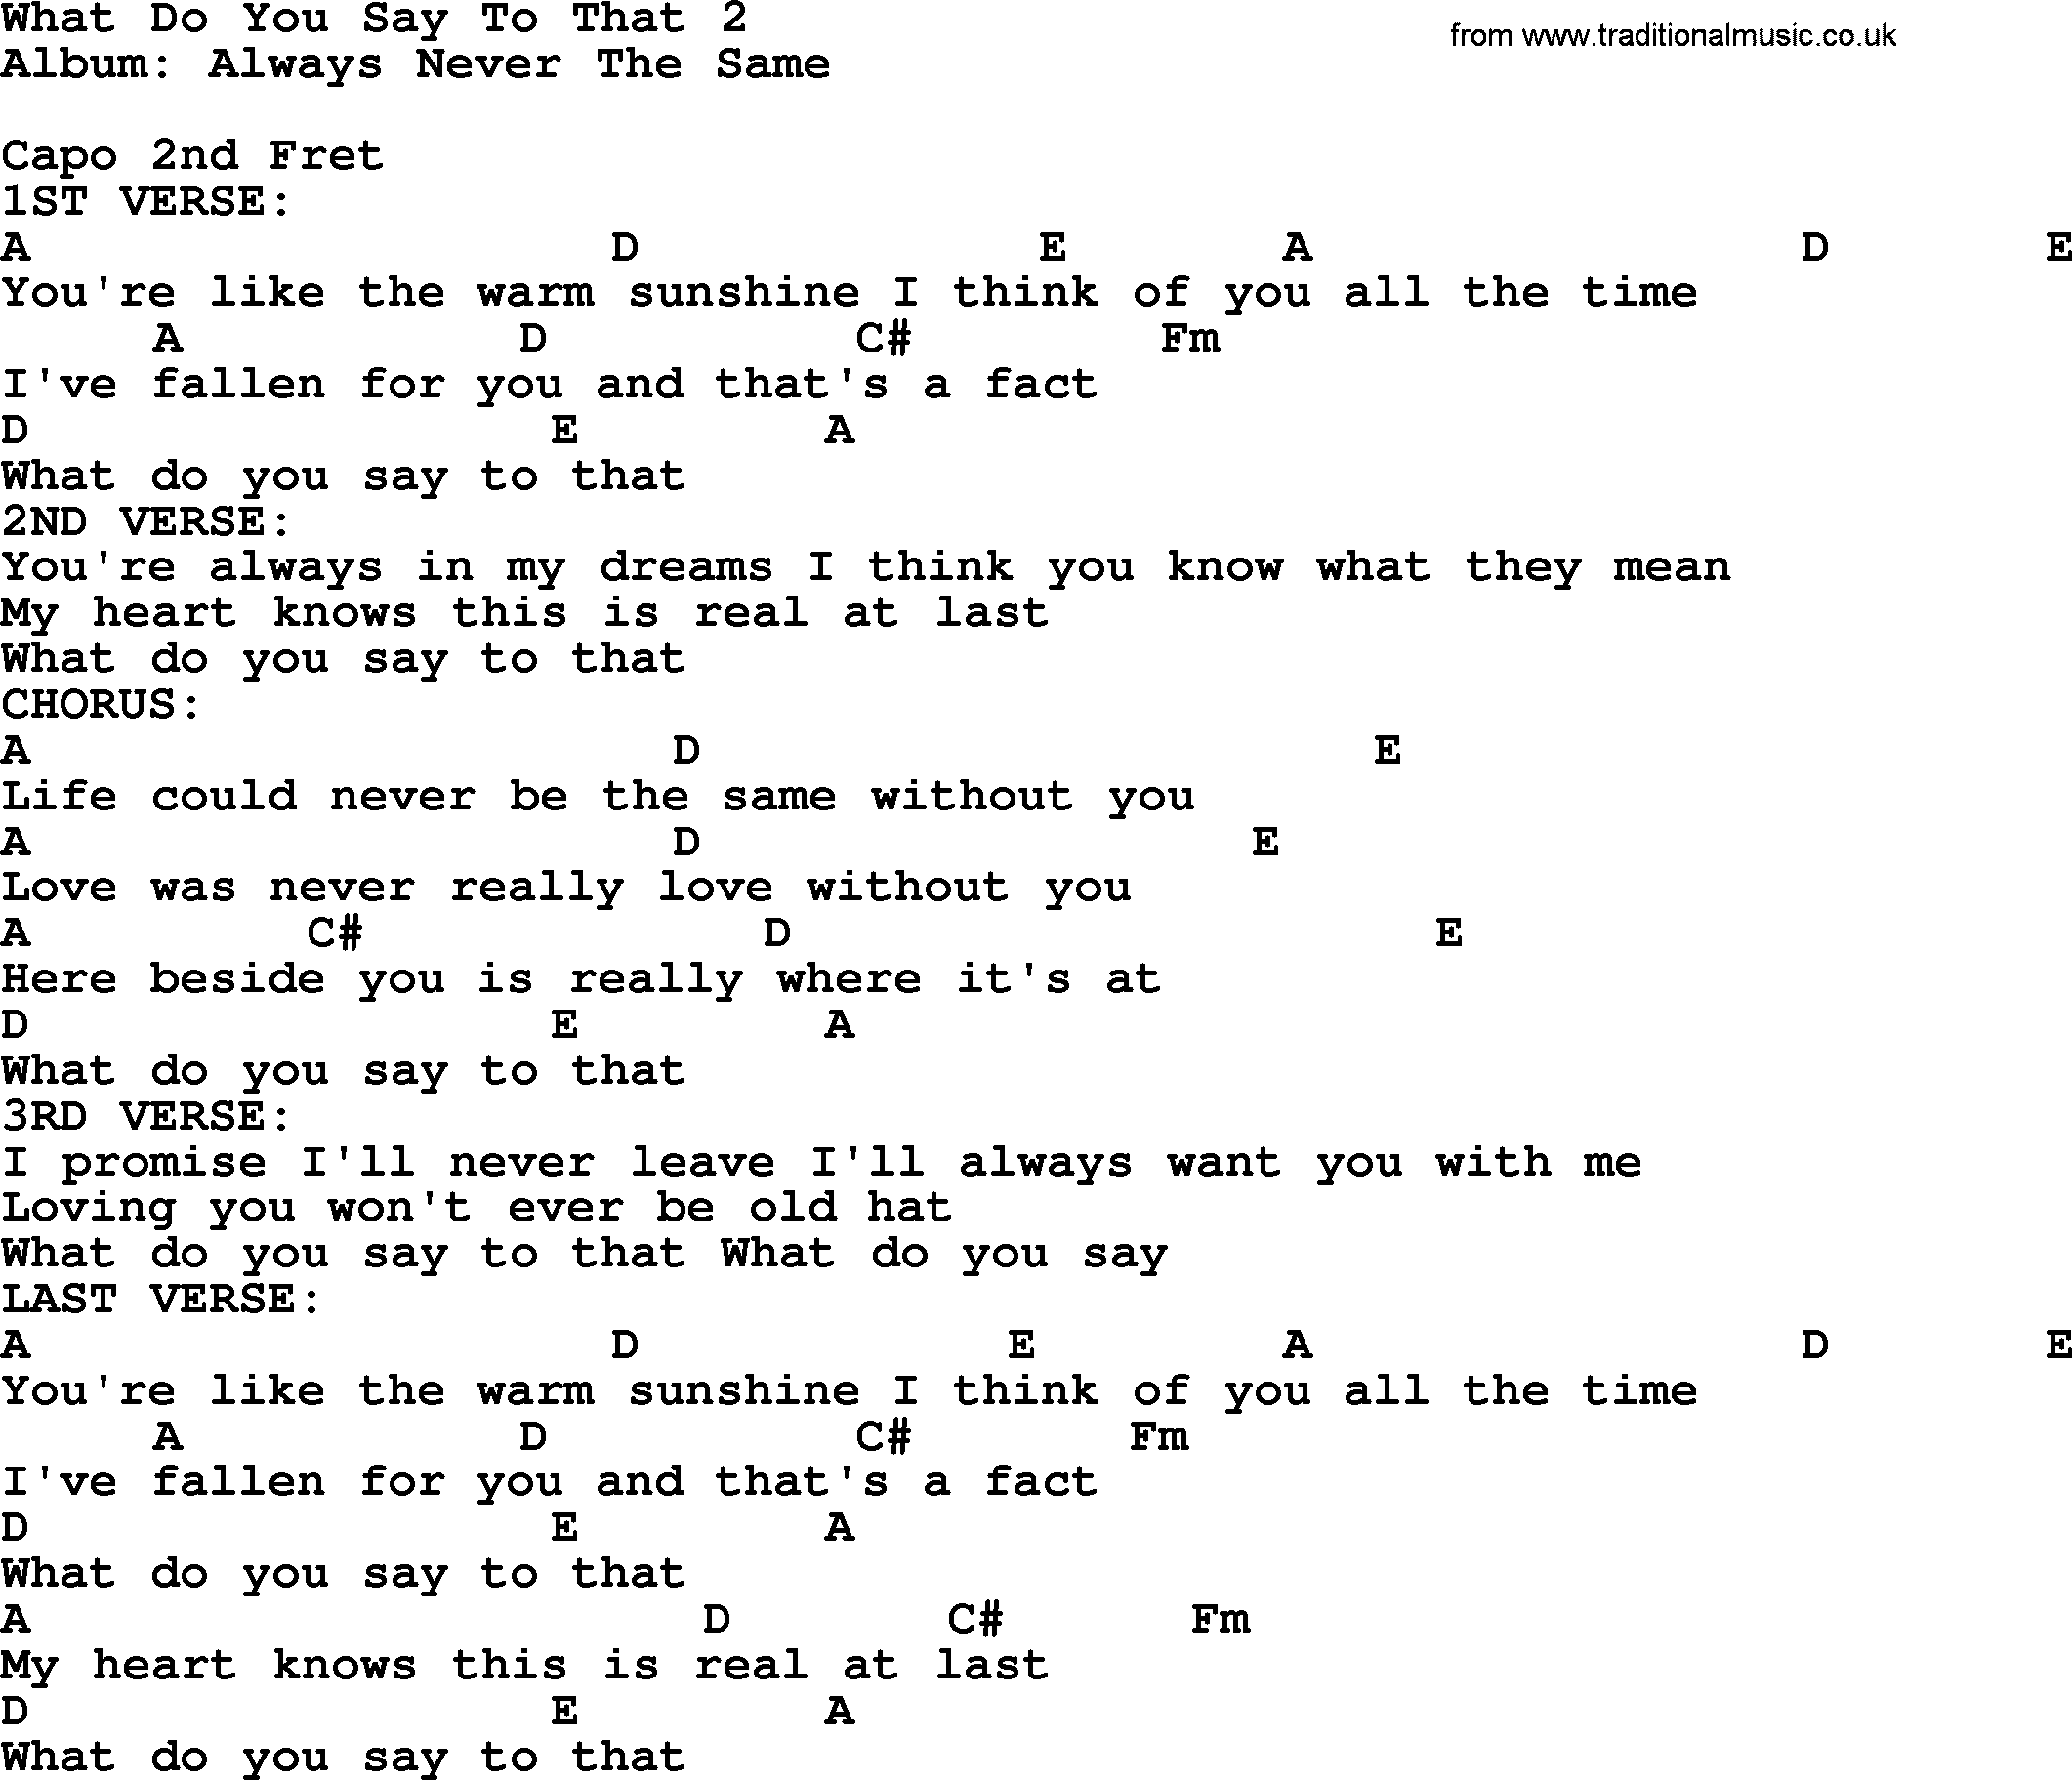 George Strait song: What Do You Say To That 2, lyrics and chords